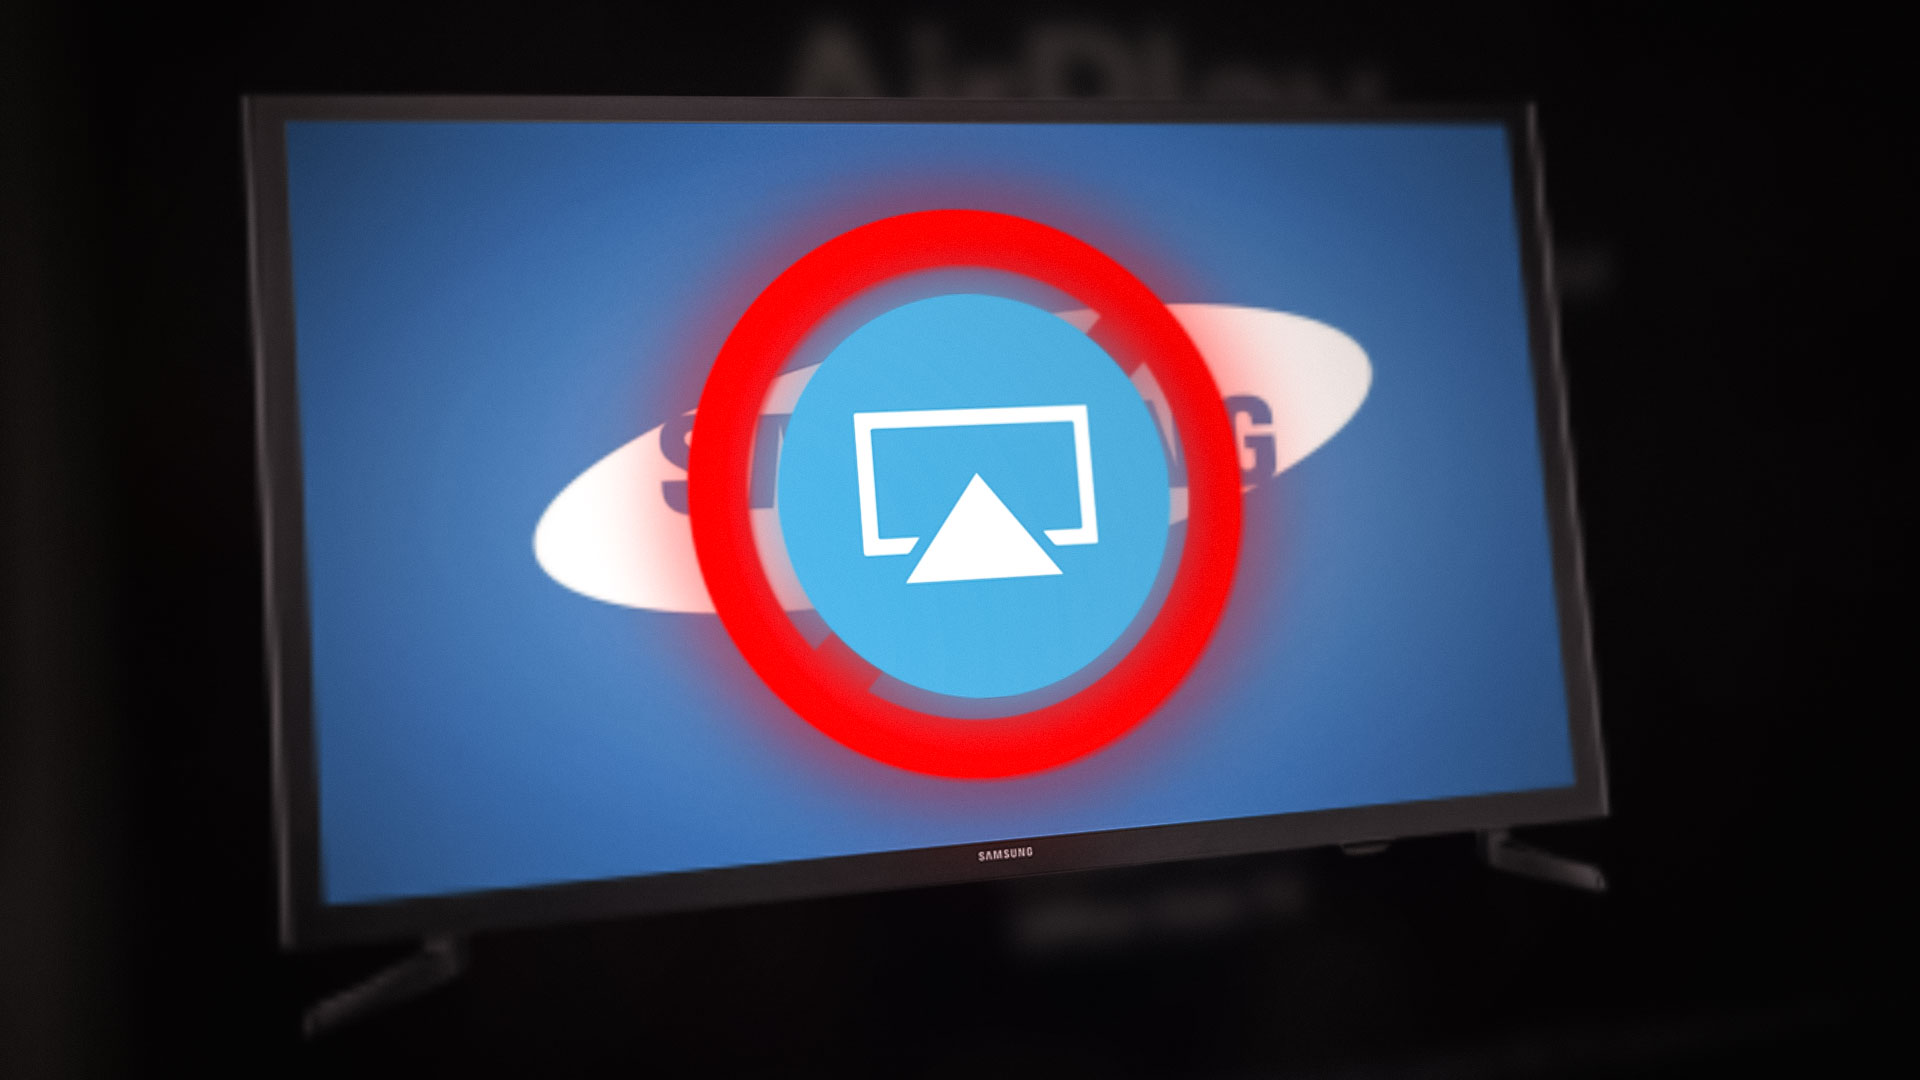 AirPlay Not Working on Samsung TV